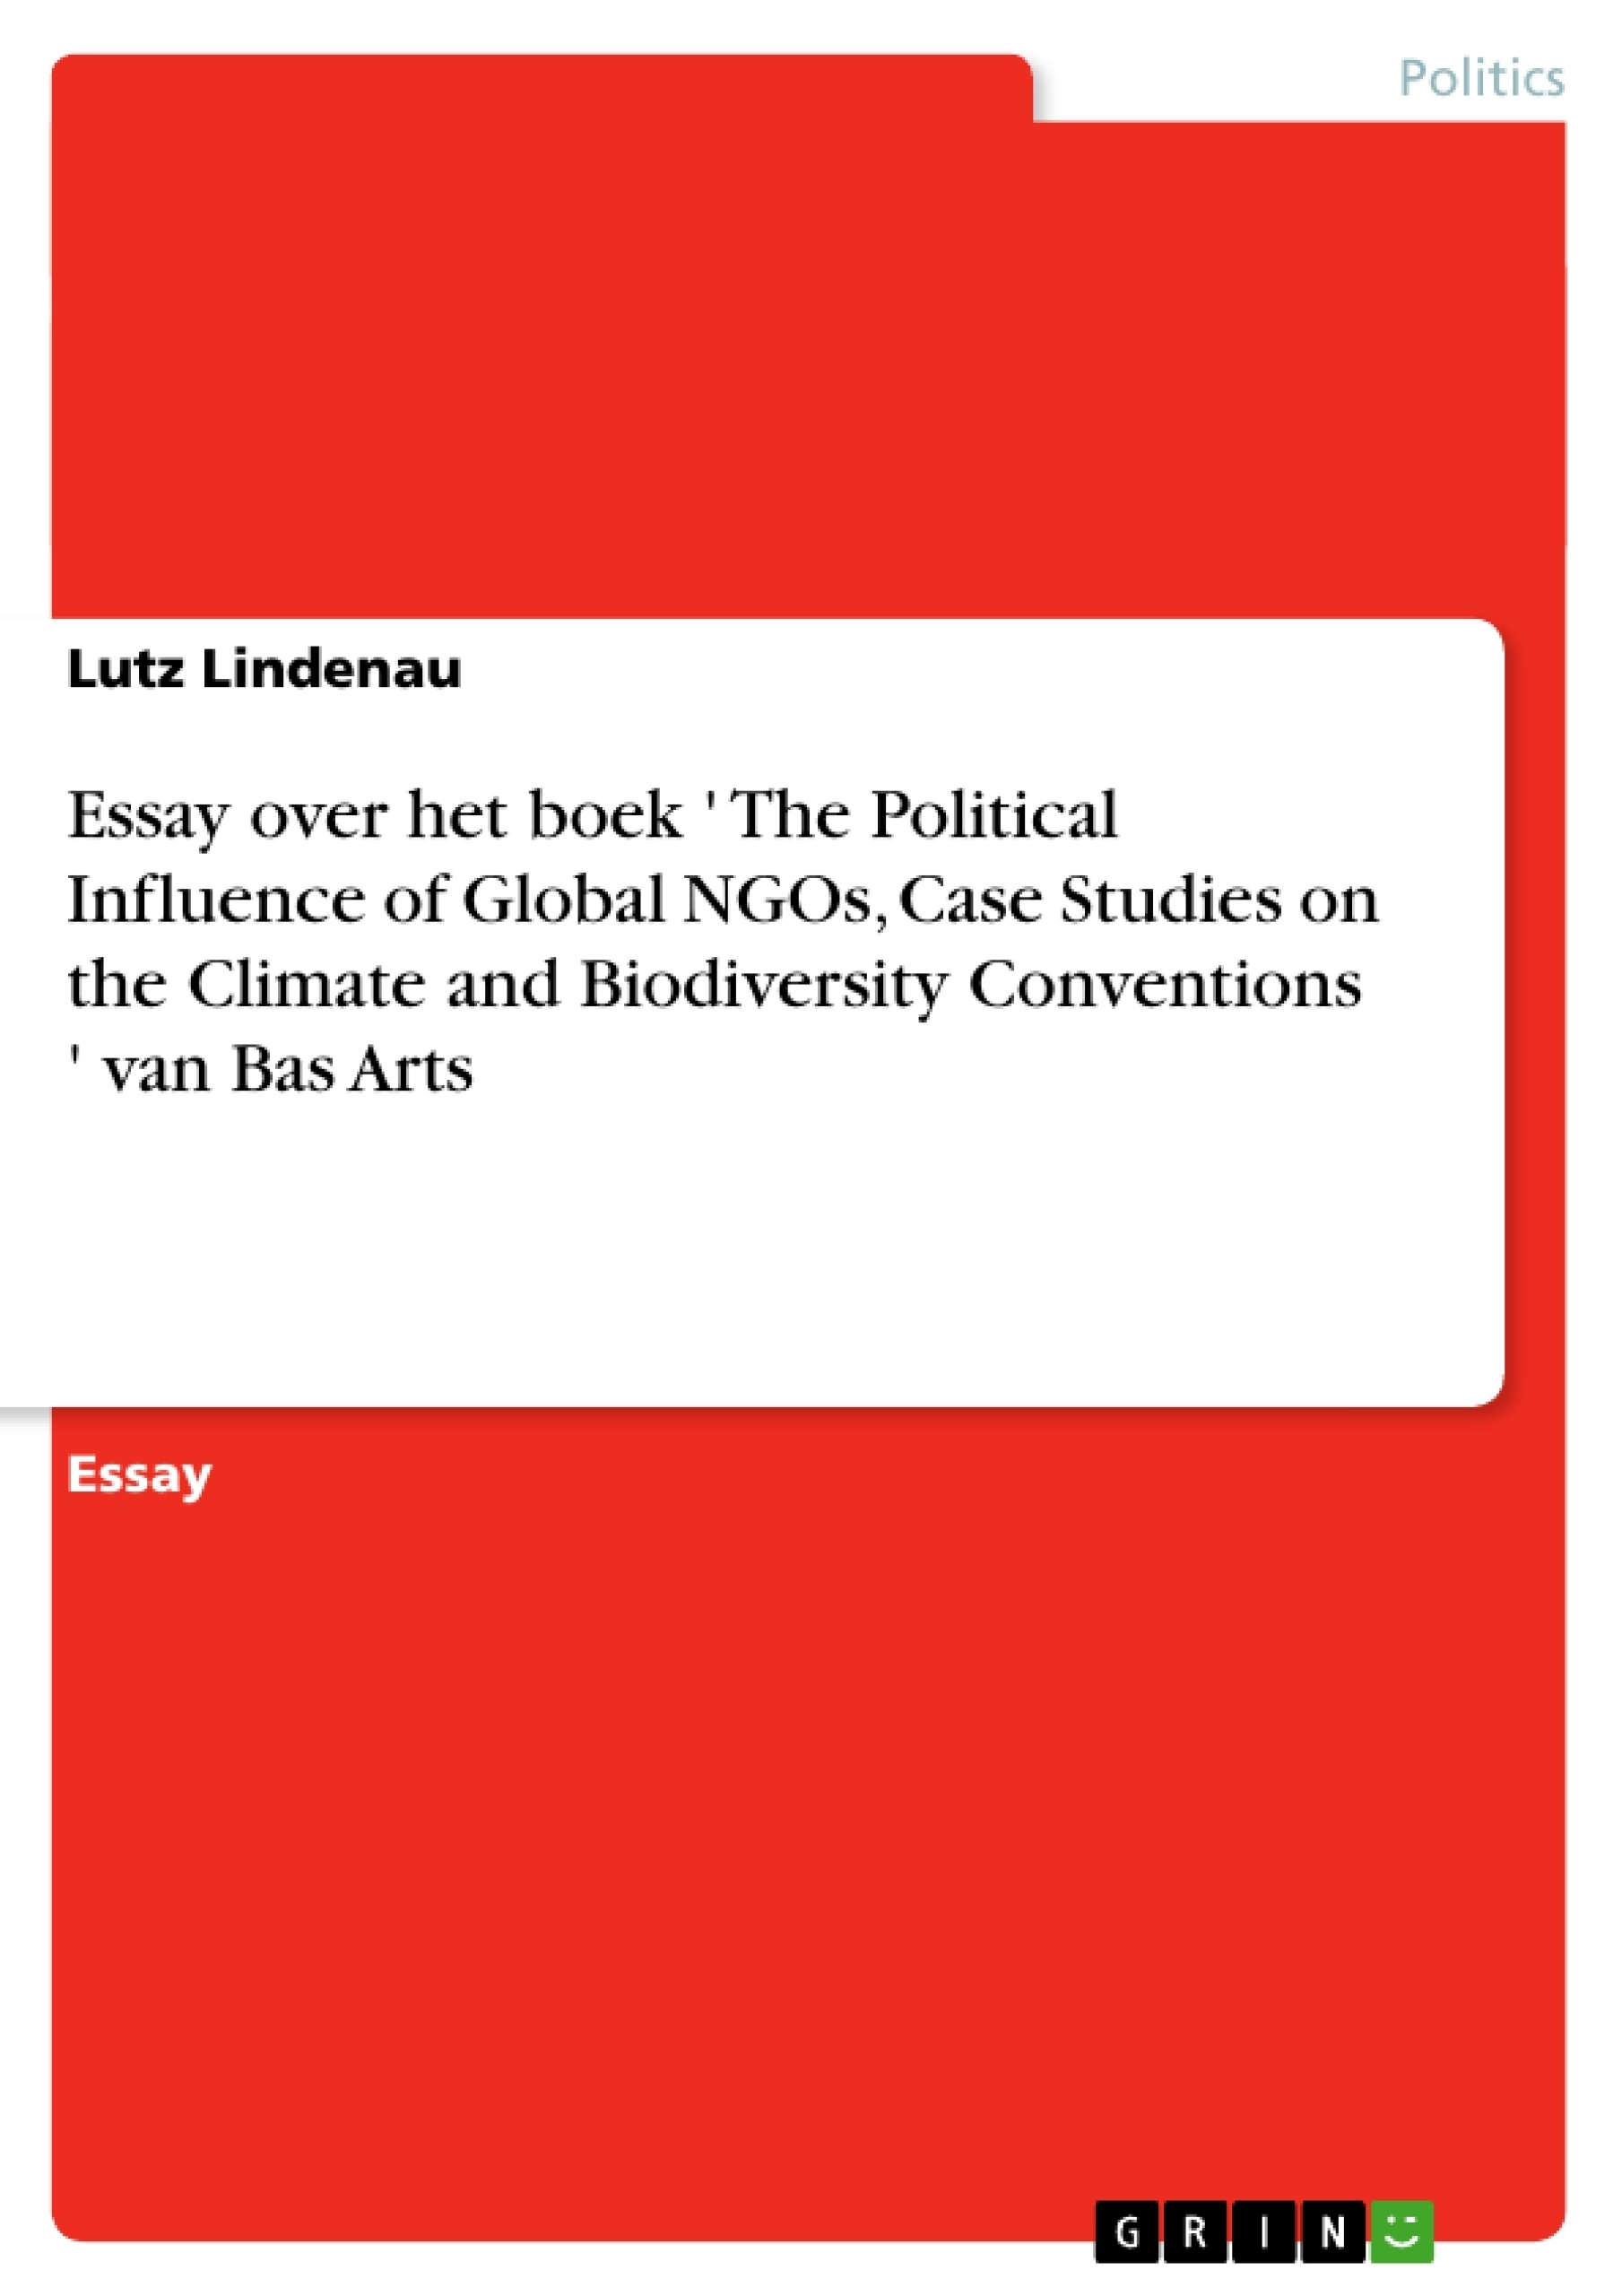 Título: Essay over het boek ' The Political Influence of Global NGOs, Case Studies on the Climate and Biodiversity Conventions ' van Bas Arts